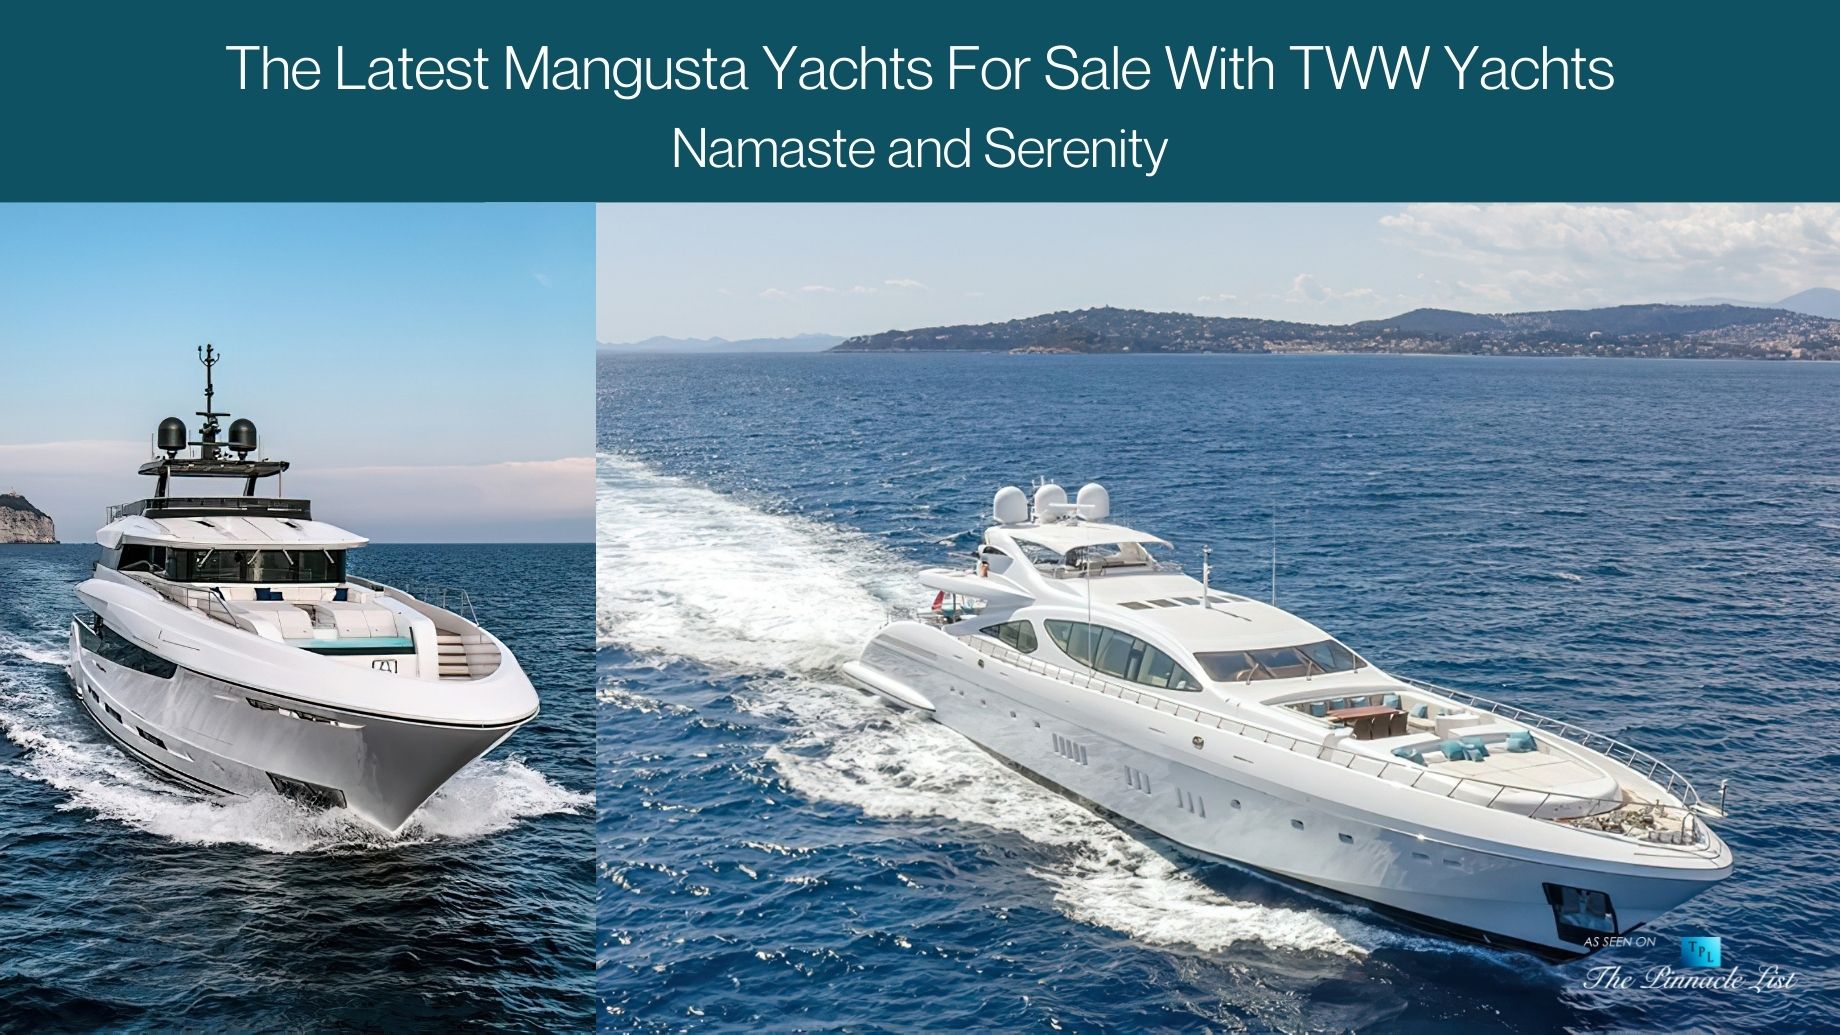 The Latest Mangusta Yachts For Sale With TWW Yachts – Namaste and Serenity